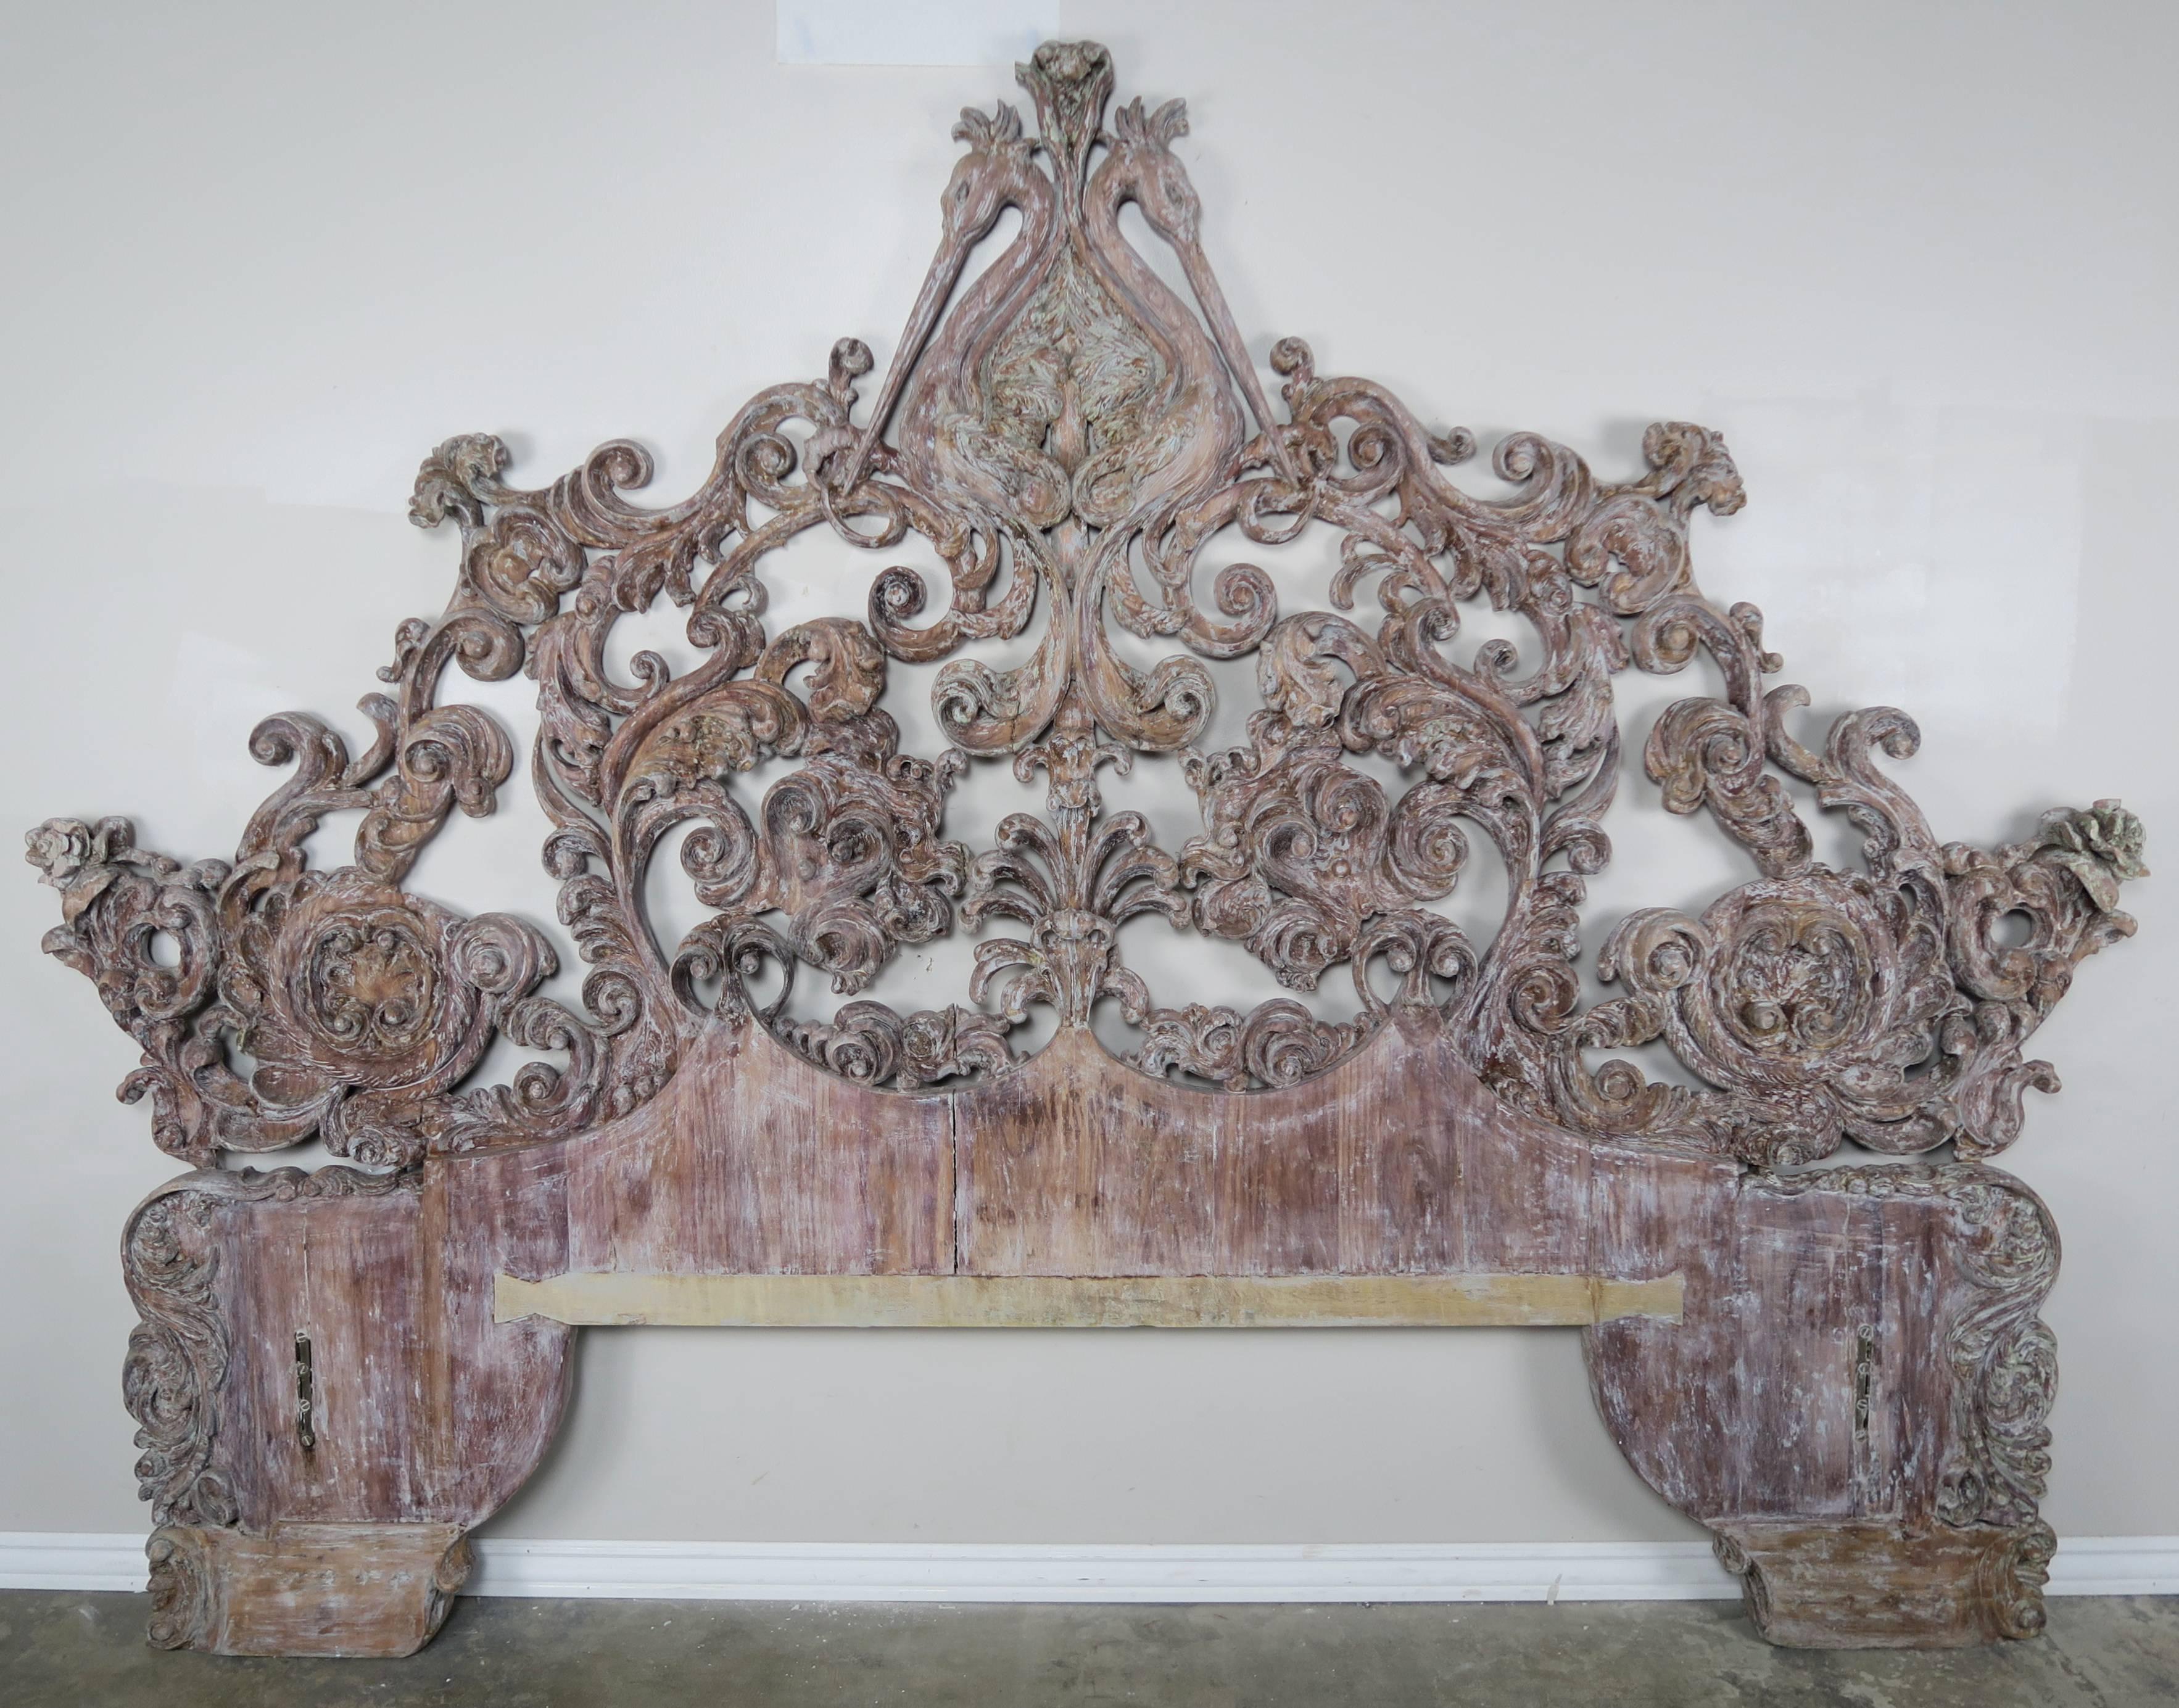 Italian carved wood Rococo style king-size headboard depicting swirling acanthus leaves throughout. Worn finish with remnants of paint can be seen.